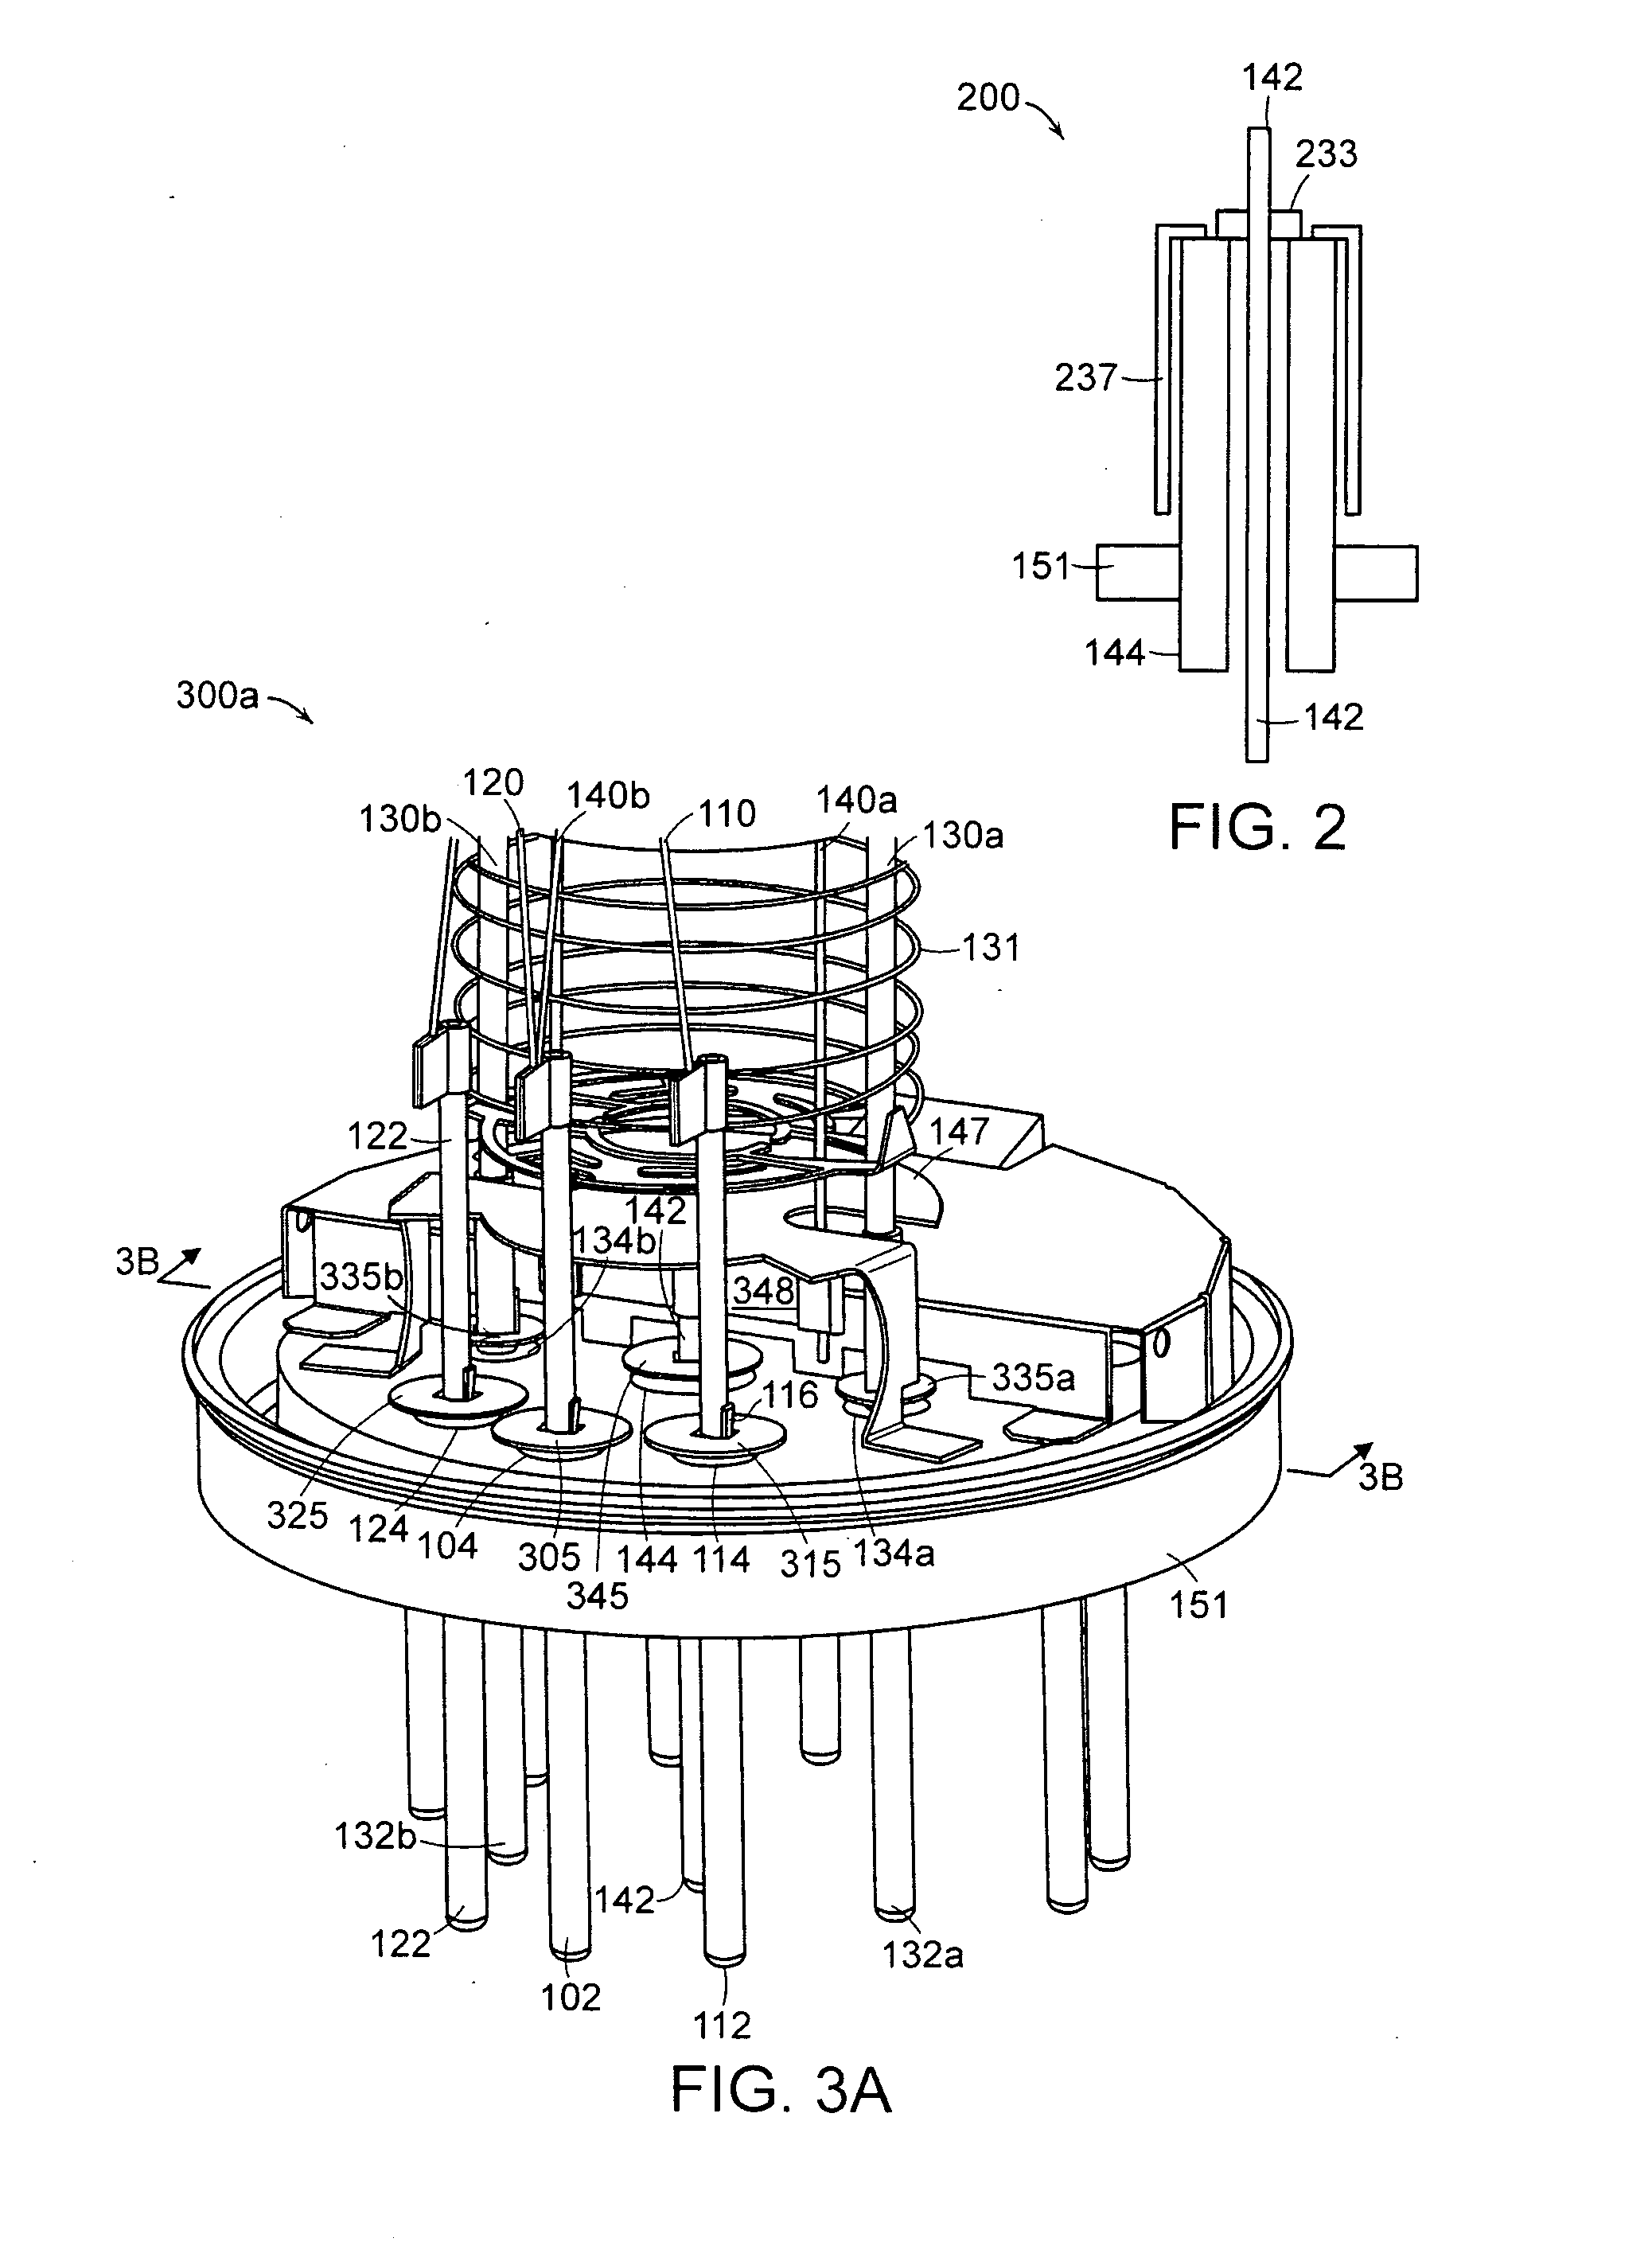 Method and apparatus for shielding feedthrough pin insulators in an ionization gauge operating in harsh environments